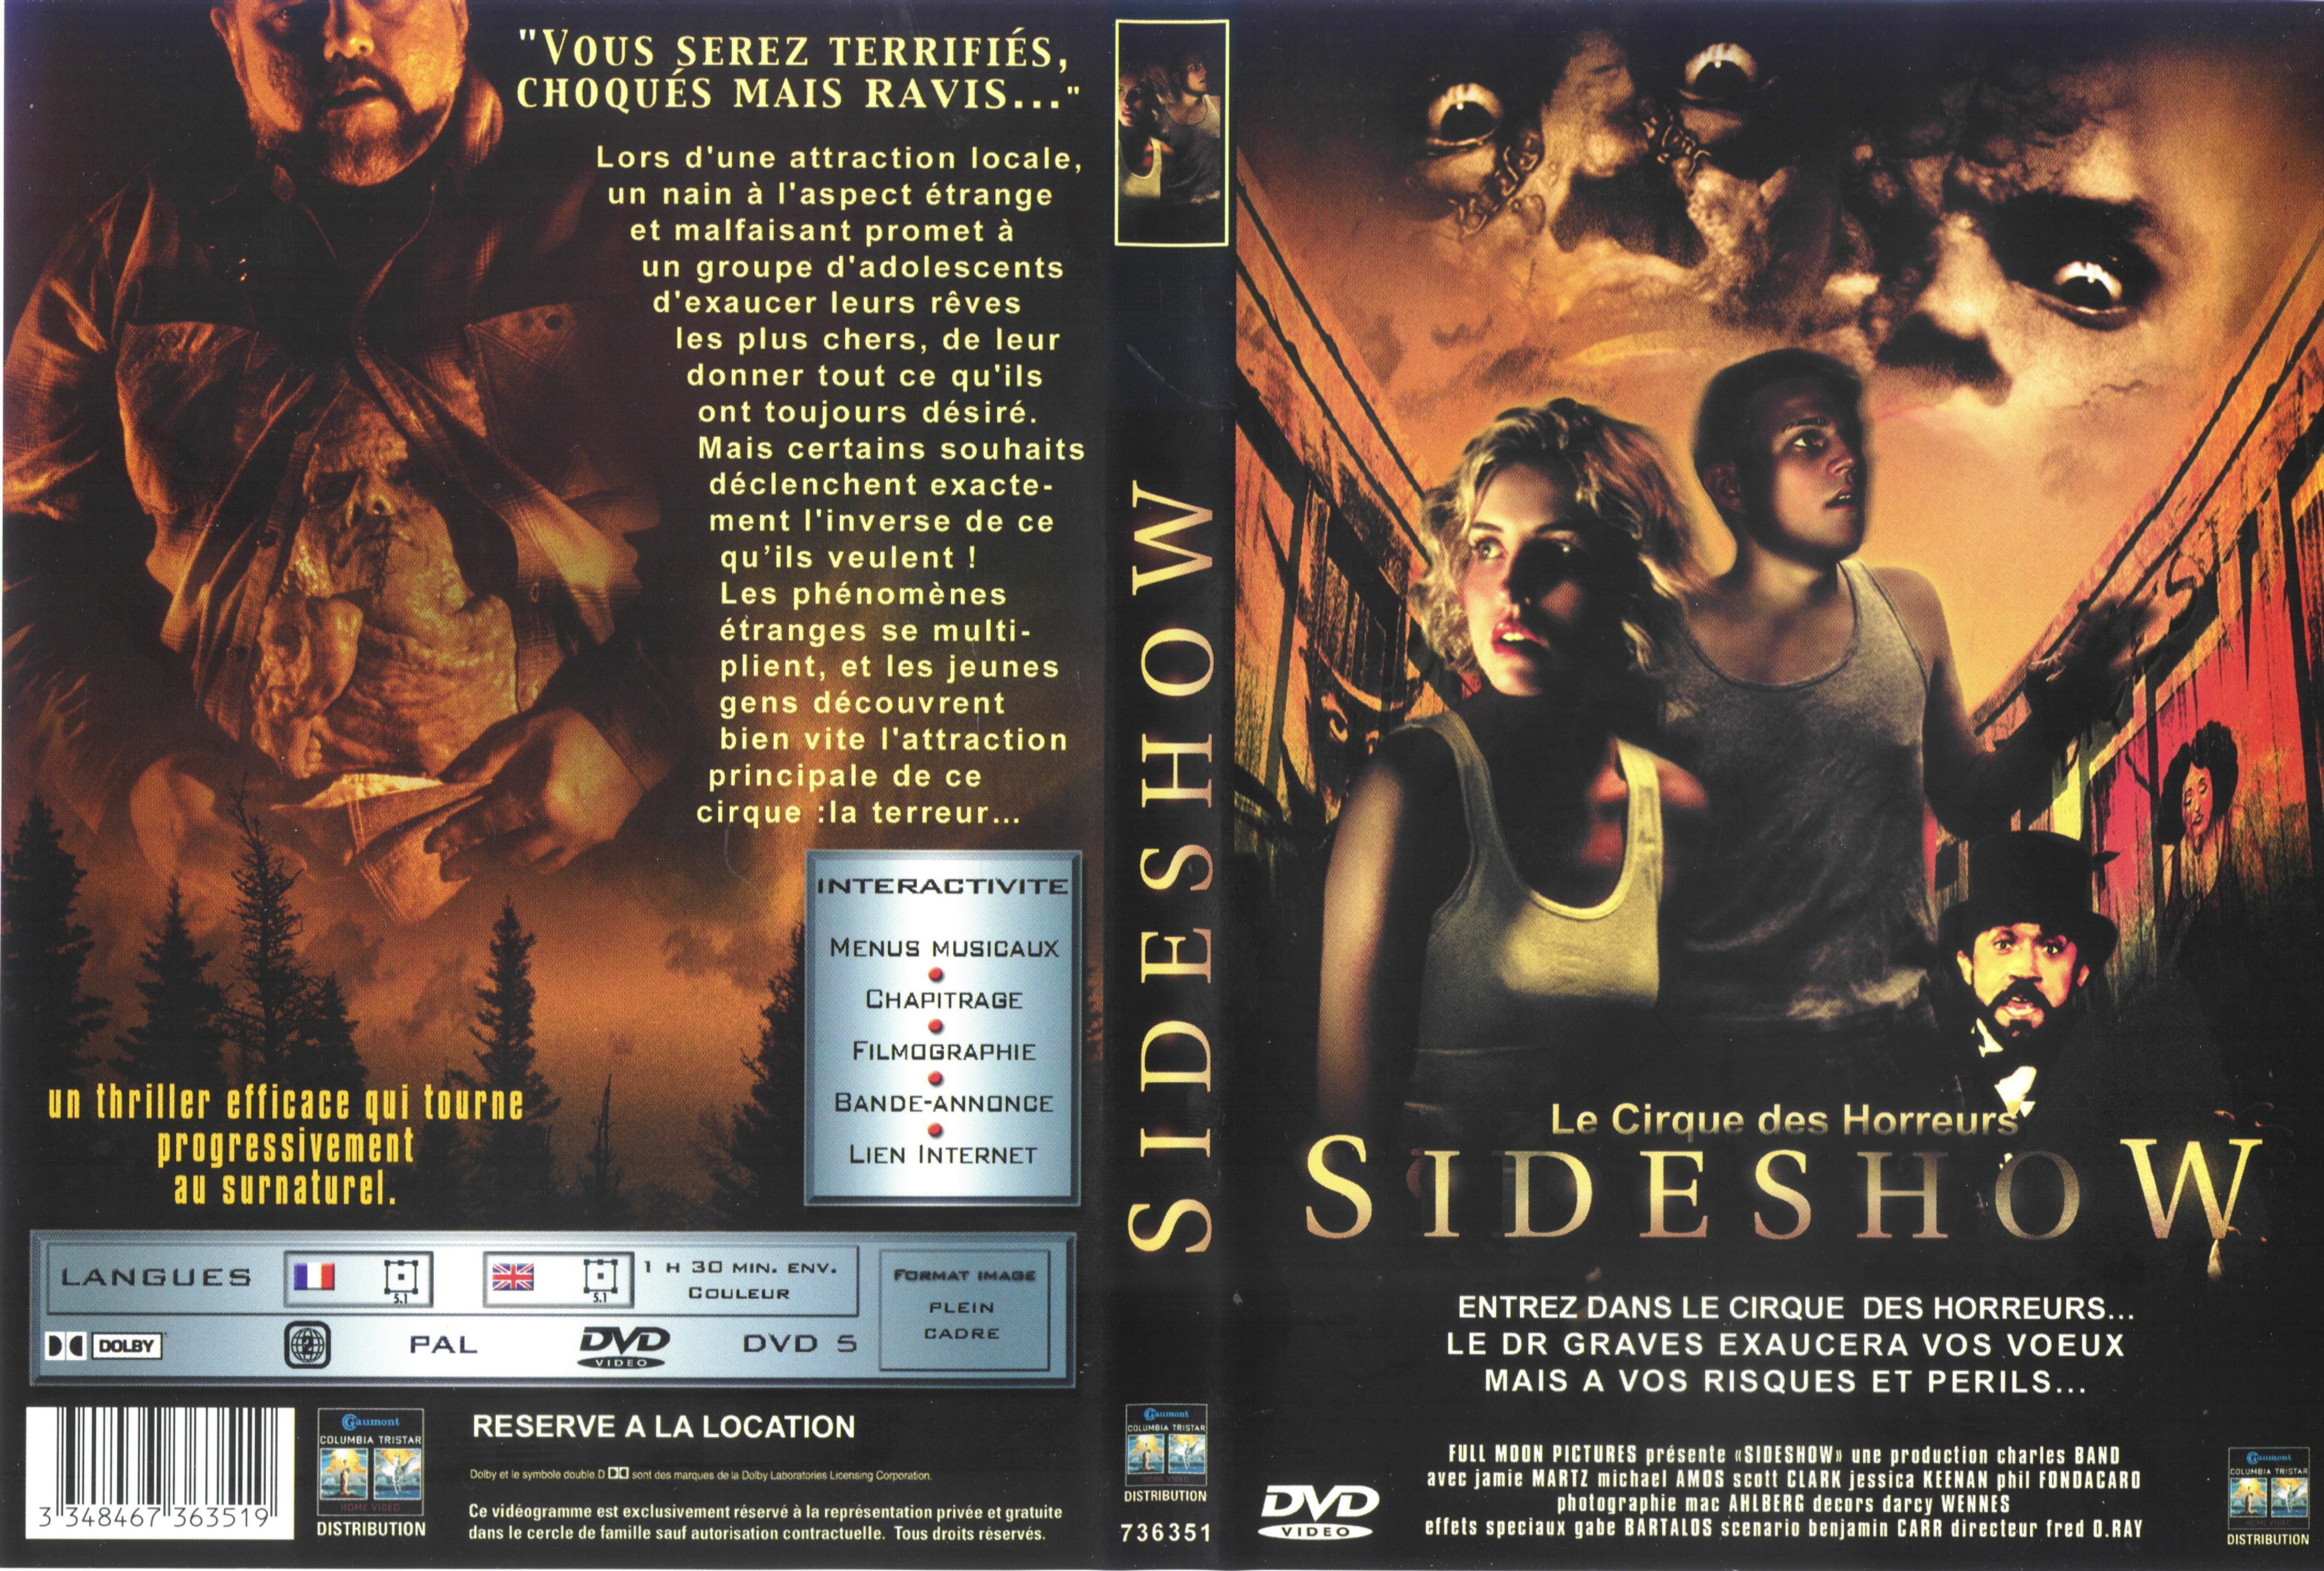 Jaquette DVD Sideshow